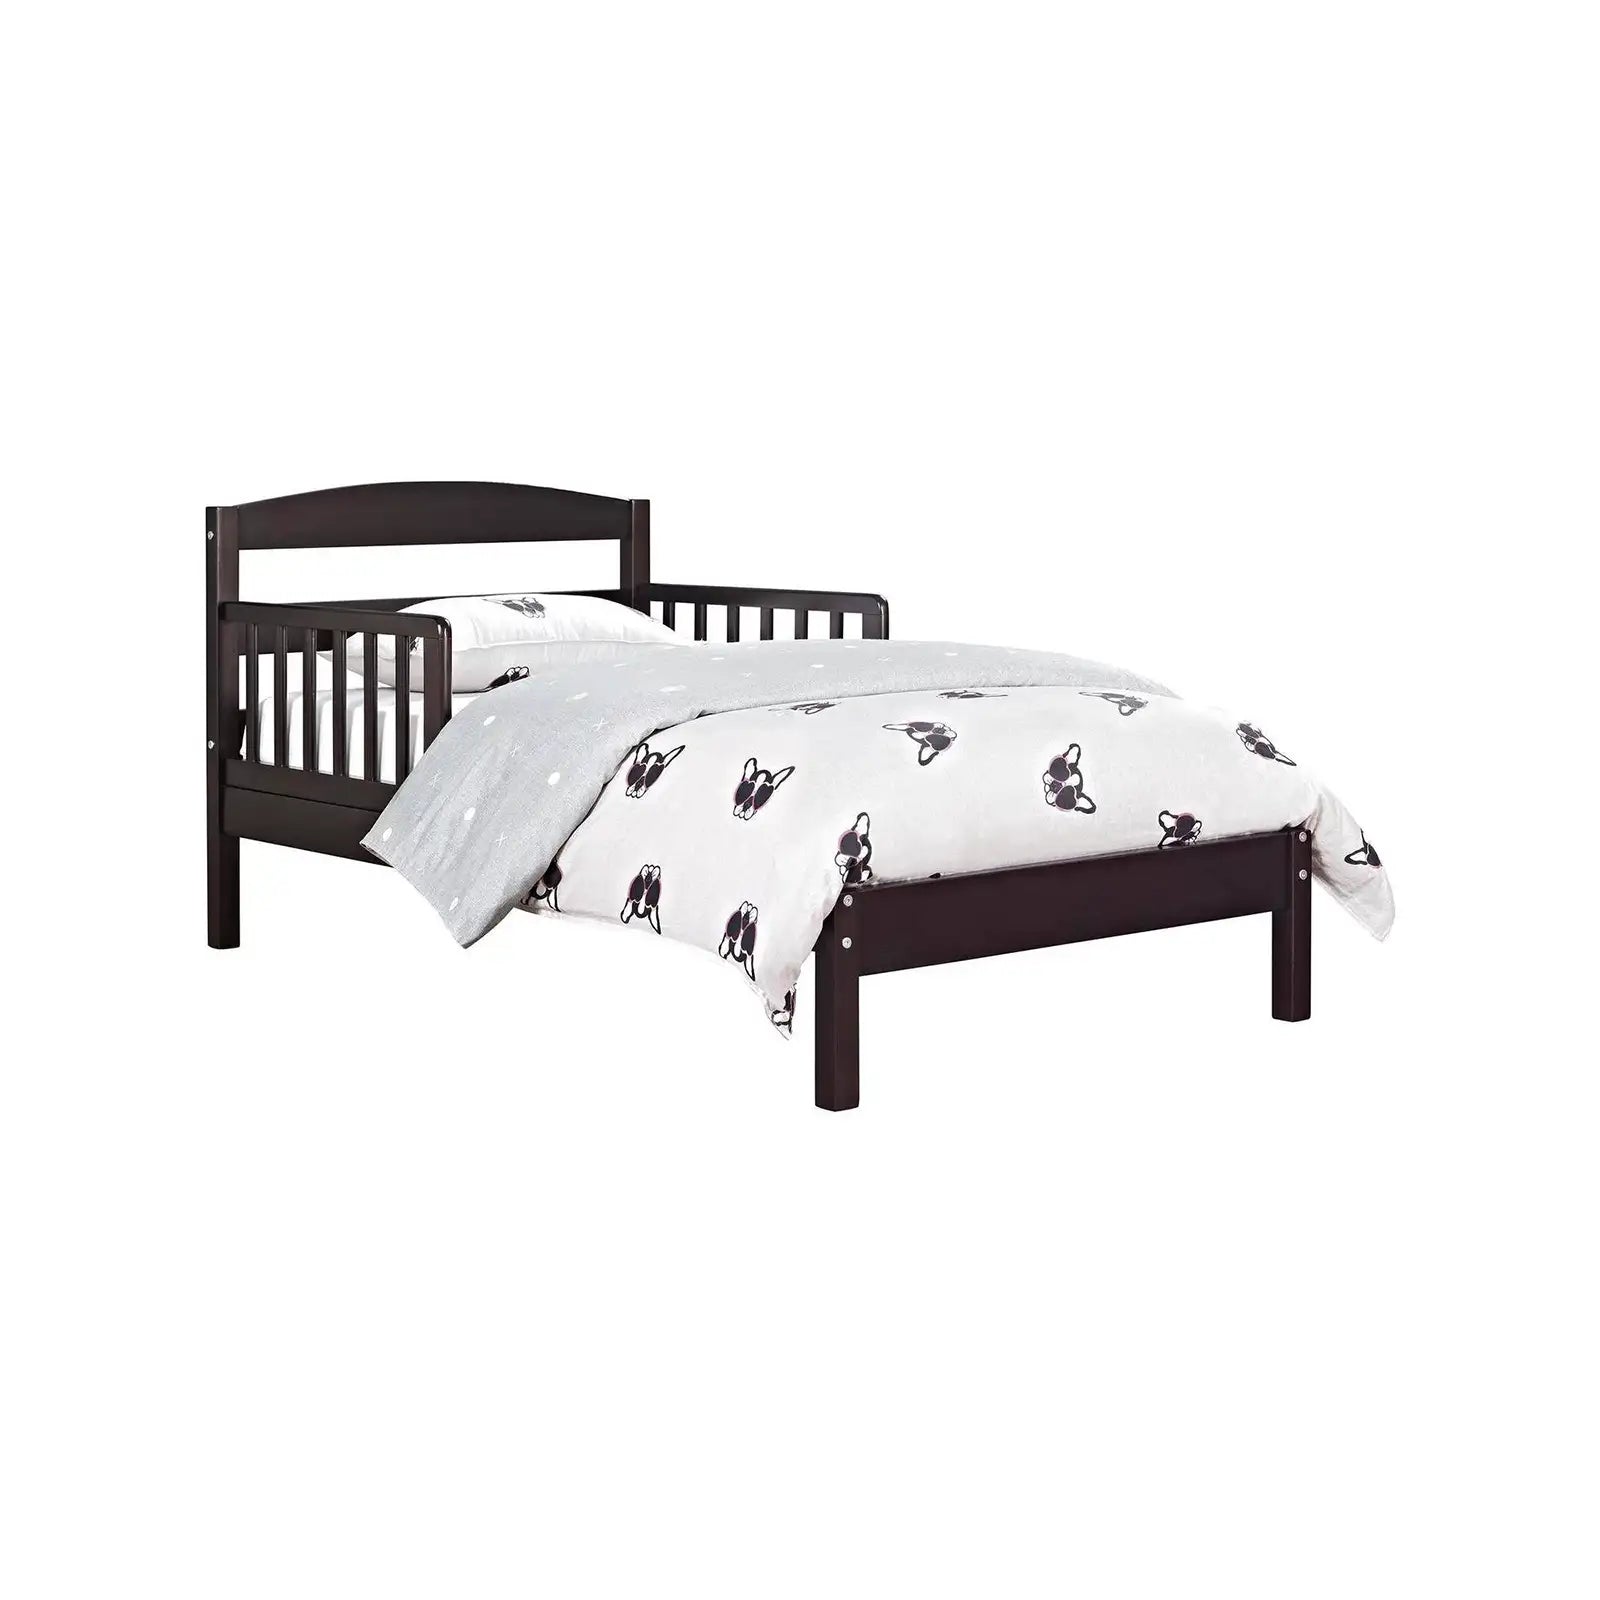 Transitional Wood Toddler Bed